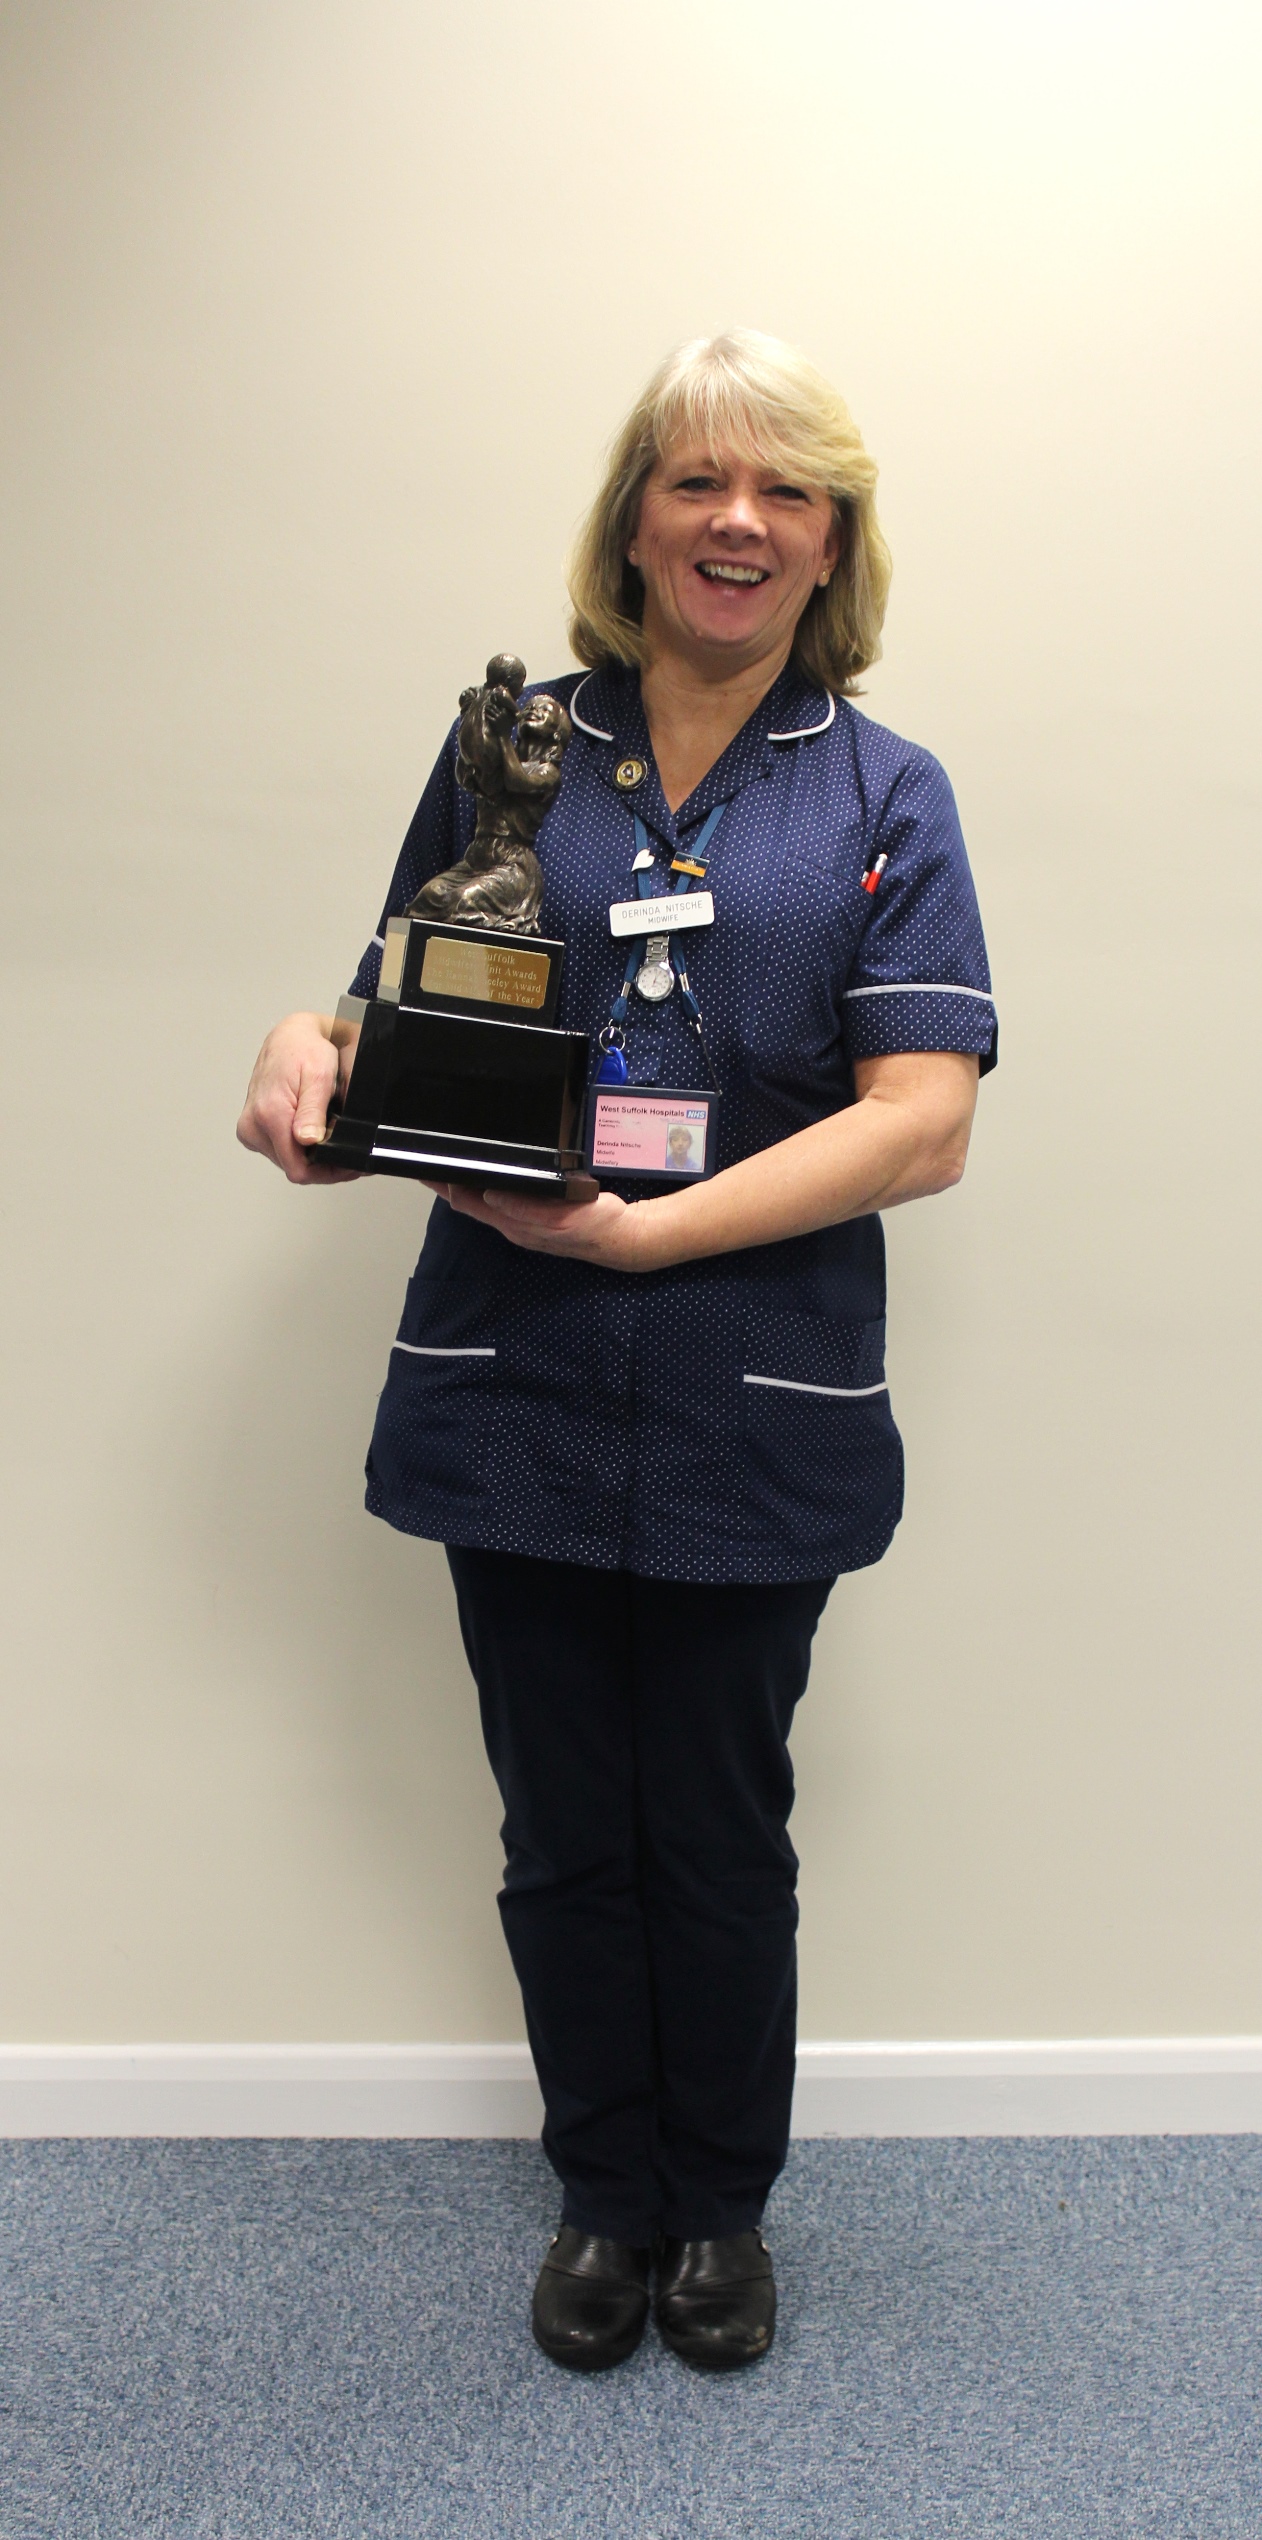 The midwife of the year award was presented to Derinda Nitsche